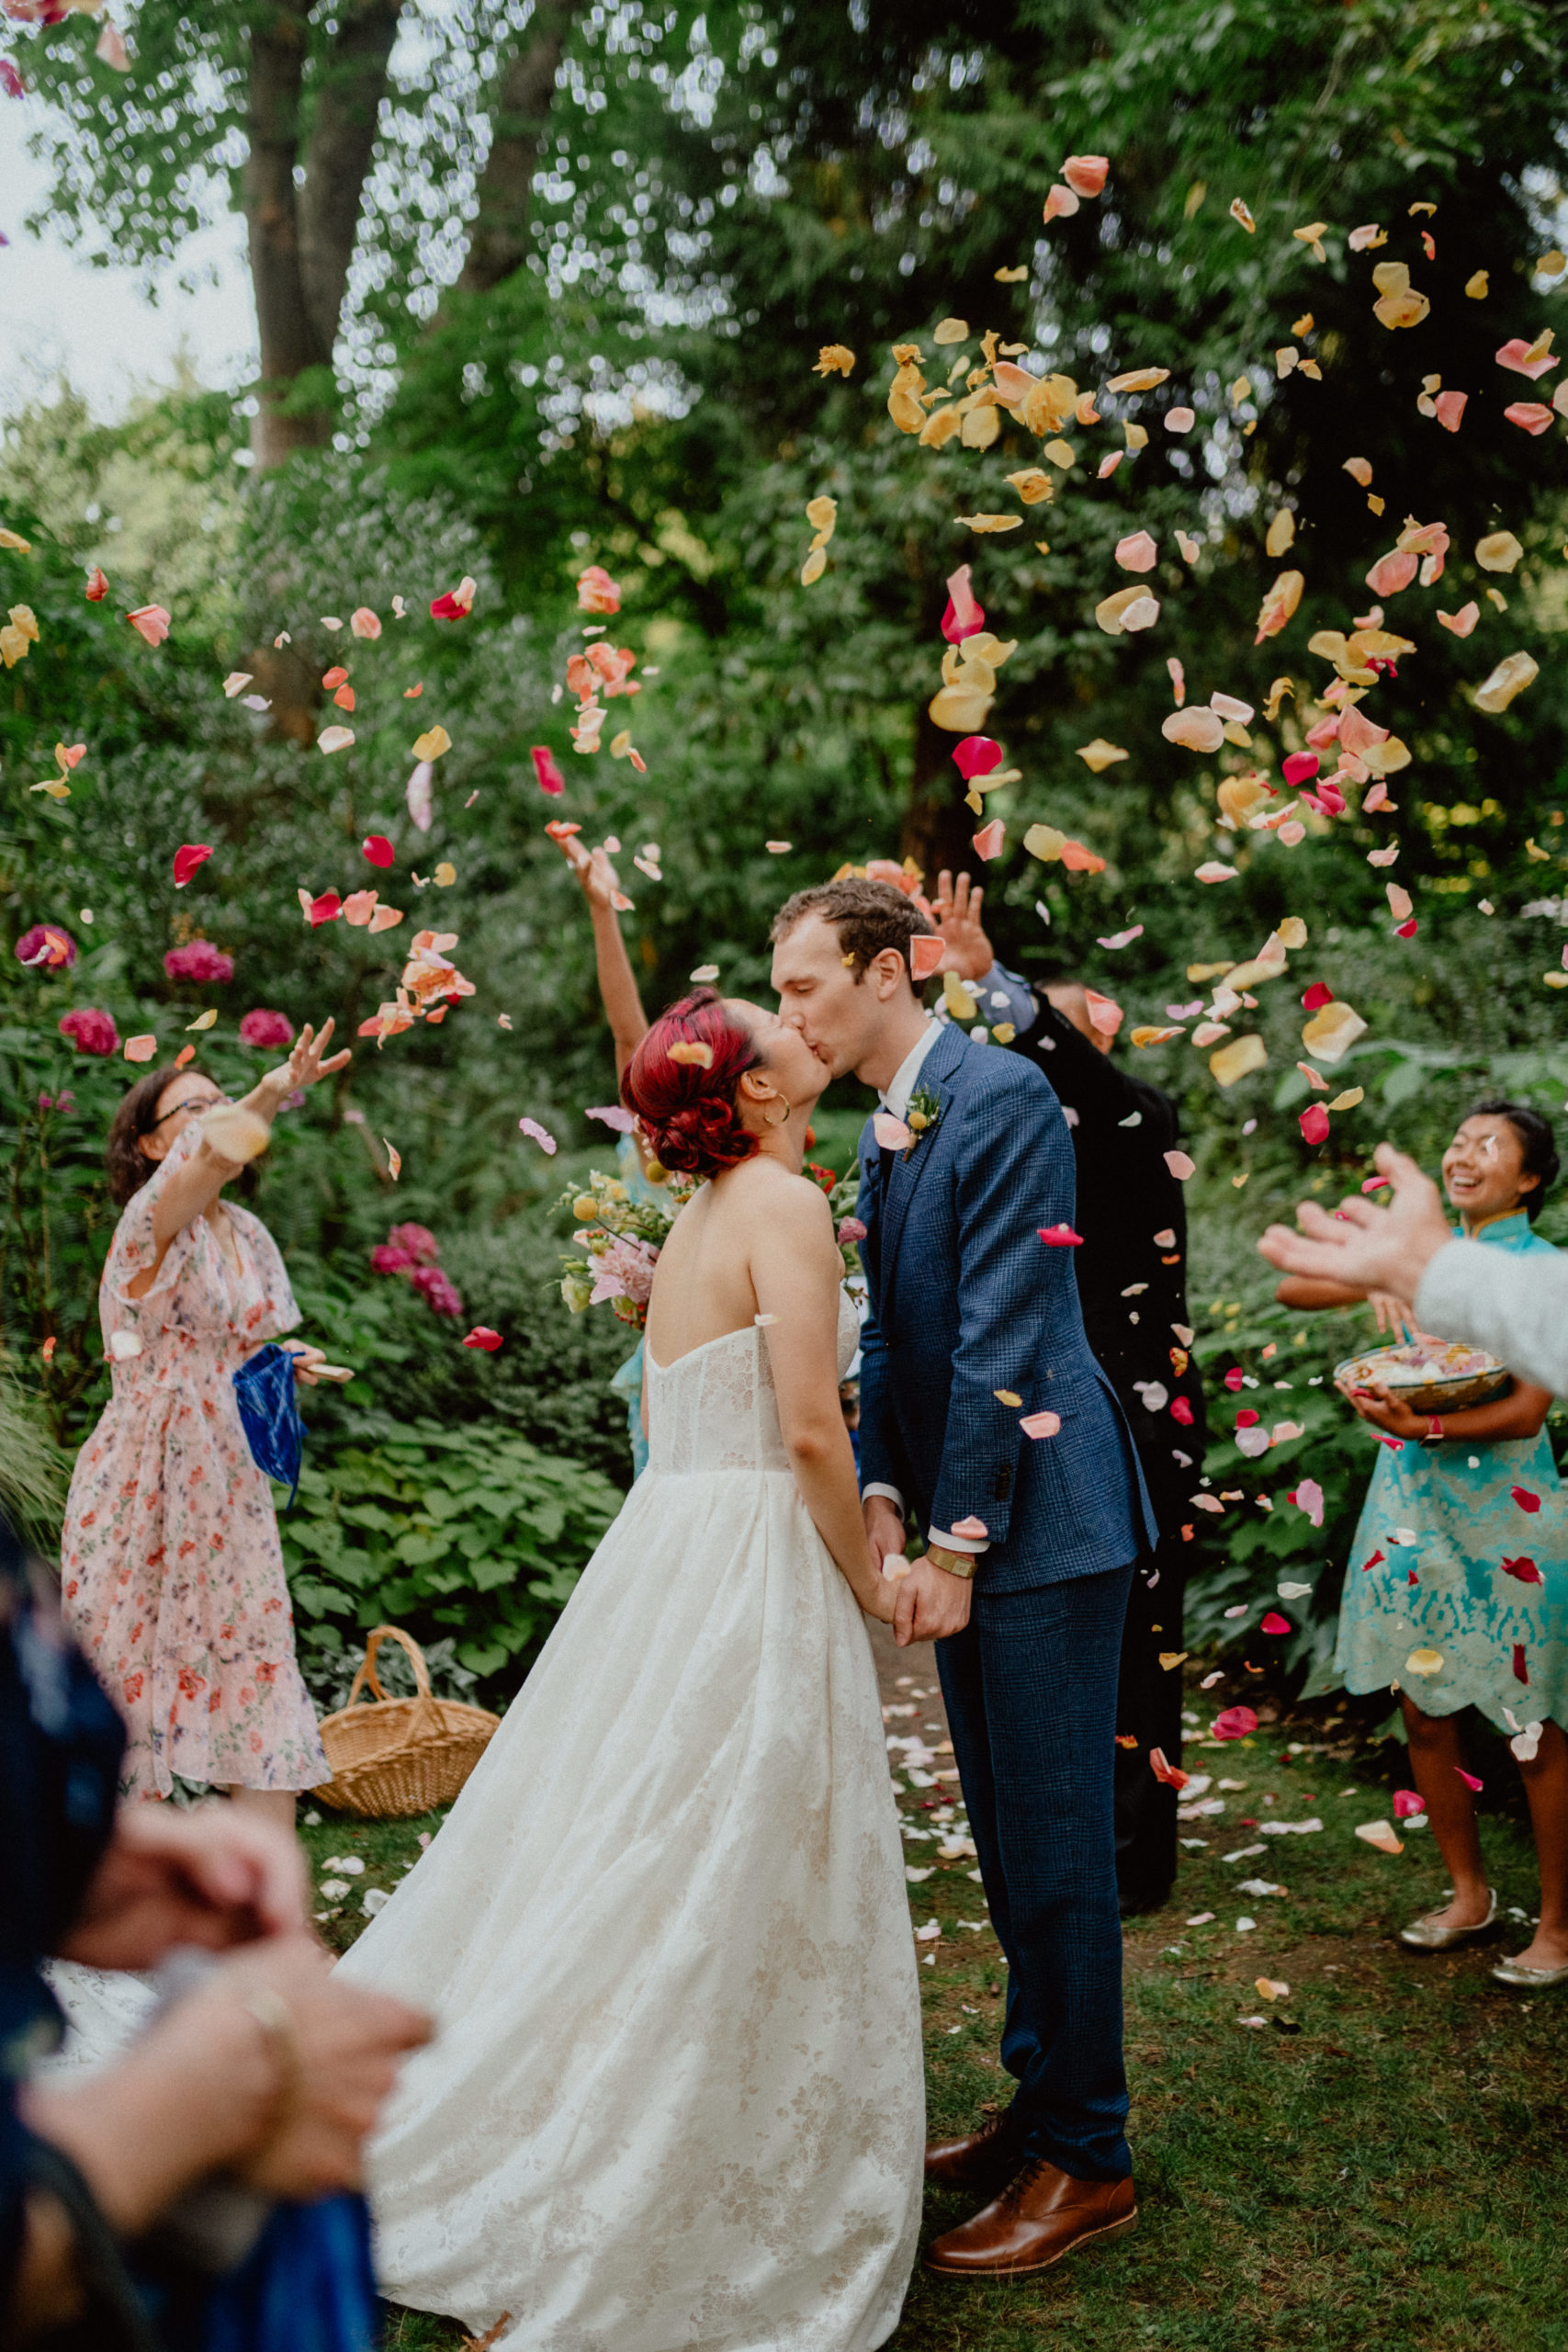 Dunn Gardens wedding, bride and groom showered with flower petals